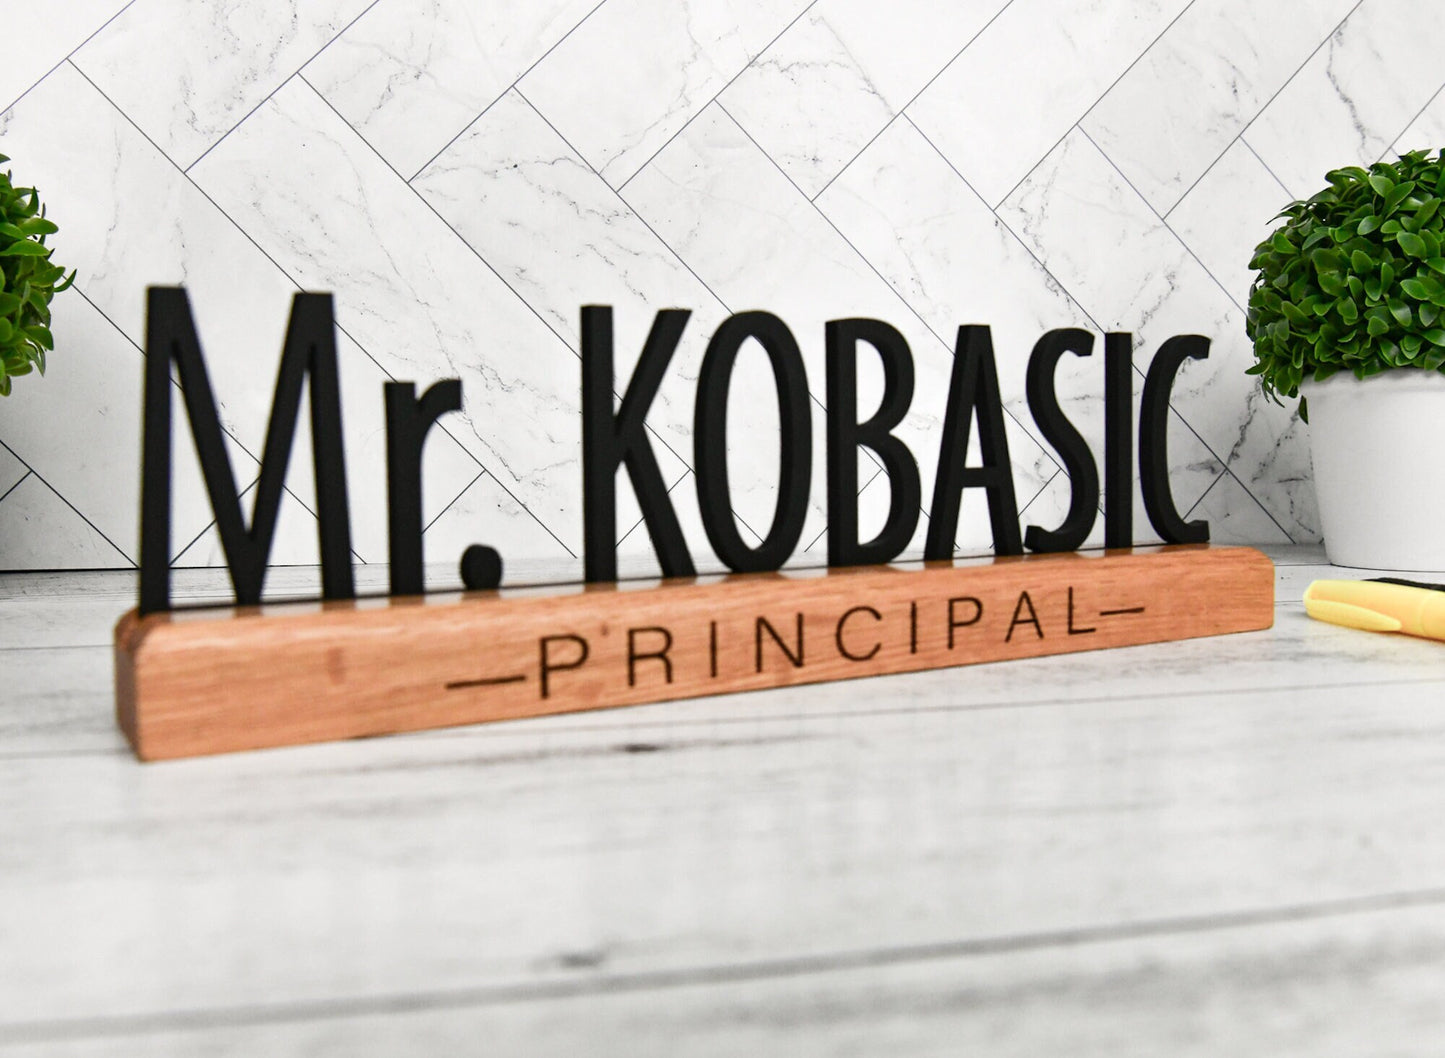 Desk Name Plate for Teacher, Principal, Executive, Custom Company Office Gifts, Personalized Wooden Sign for classroom or office personal